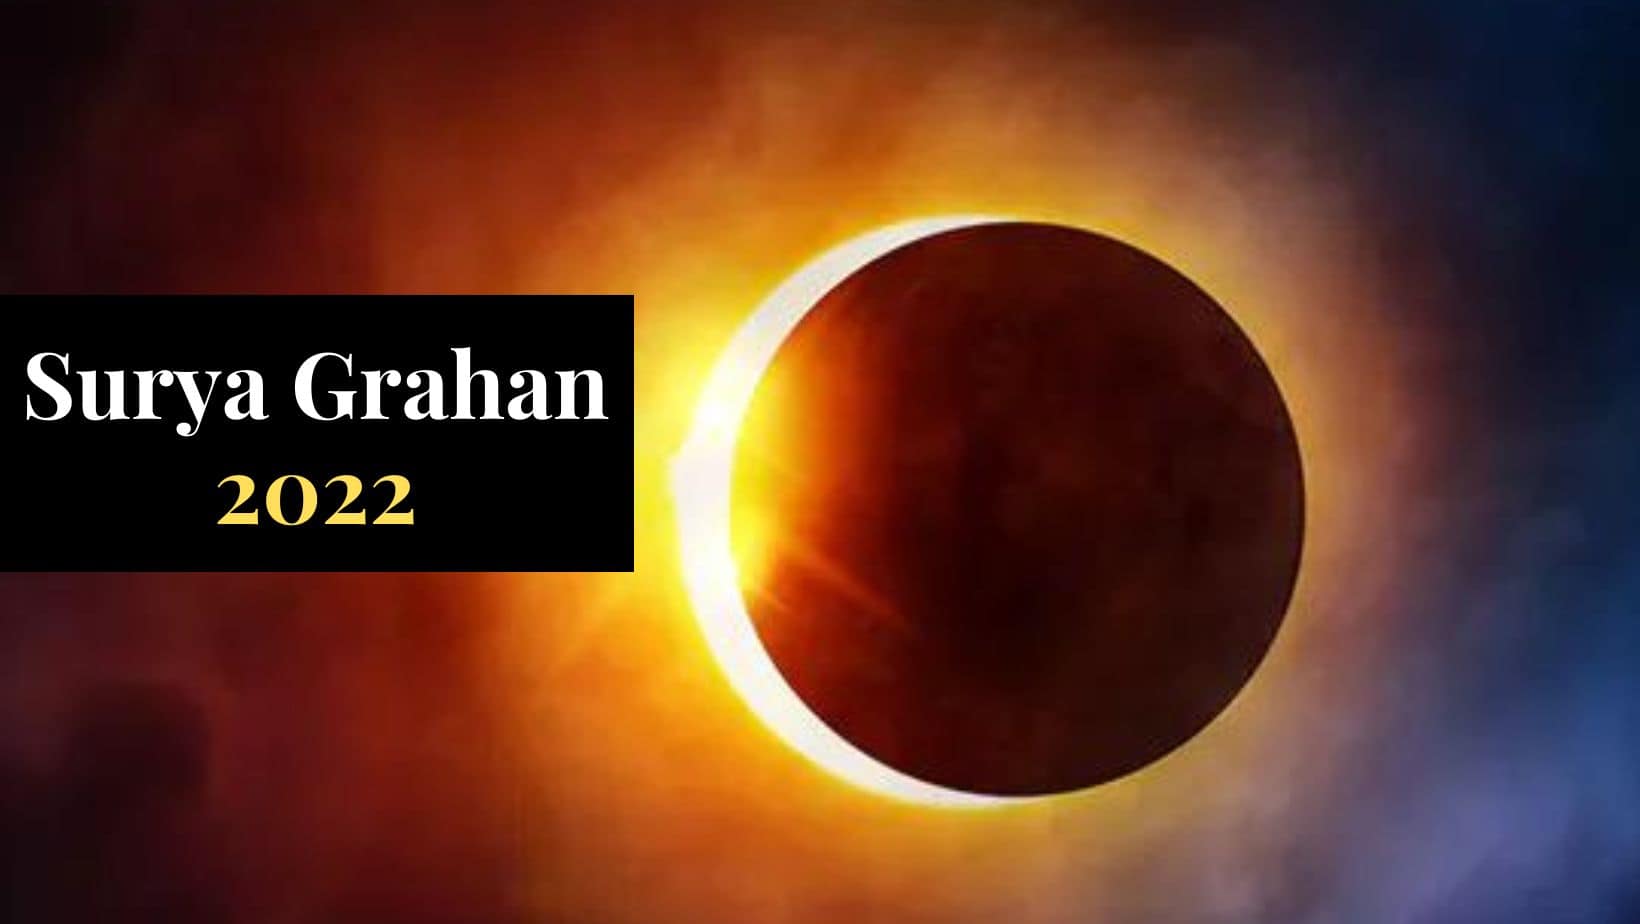 Surya Grahan Do’s And Don’ts to Stay Safe During The Solar Eclipse